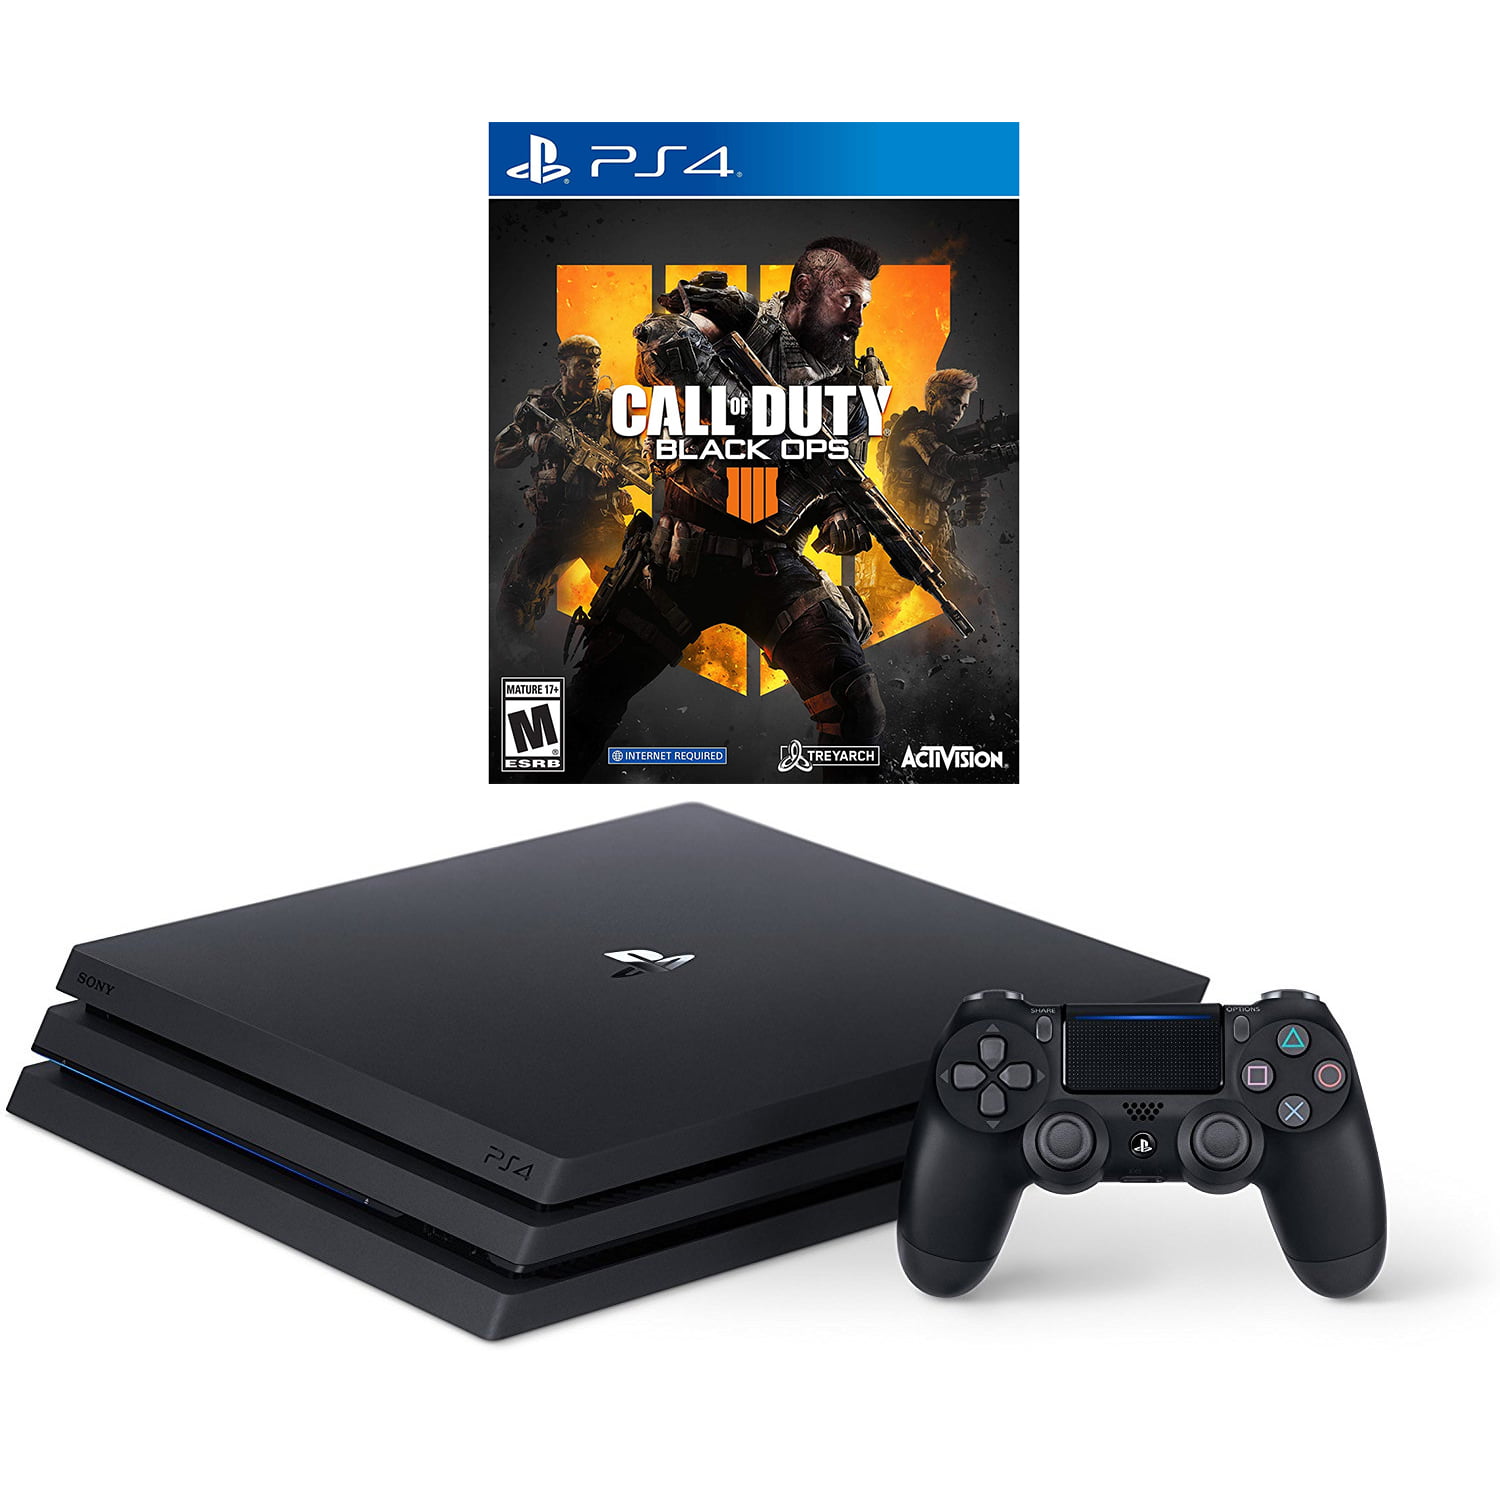 dome Europe salami PlayStation 4 Pro 1TB Console with Call of Duty Black Ops 4 Bundle -  Walmart.com